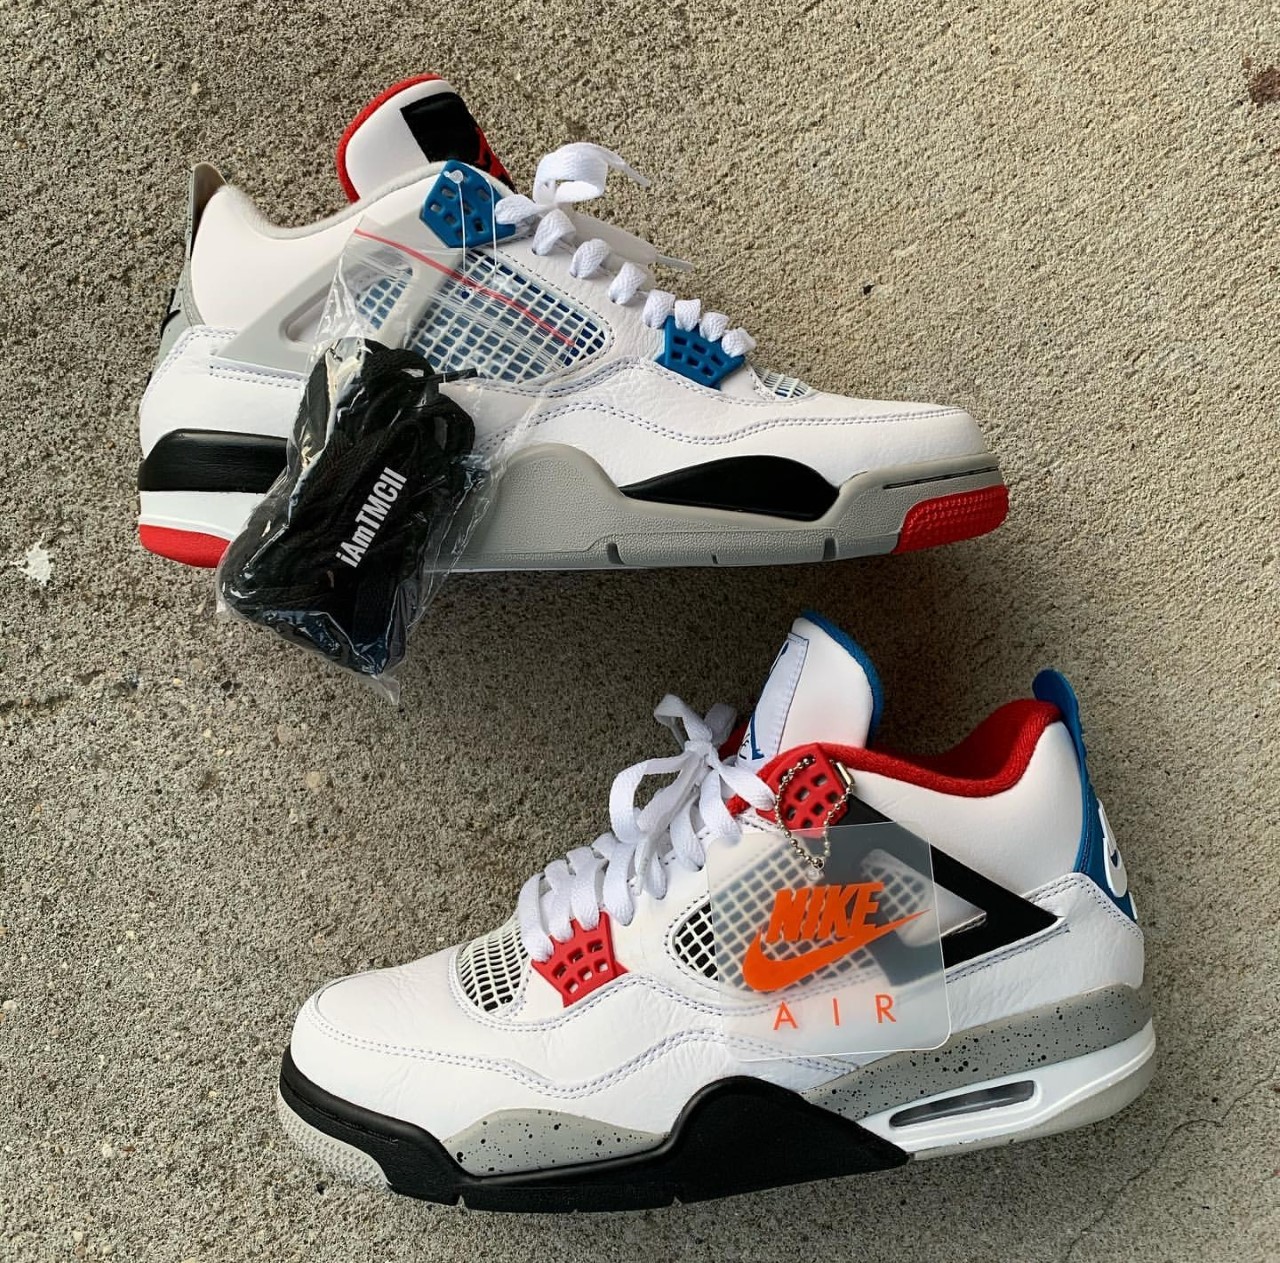 The Air Jordan 4 Retro “What The” Releases This Month